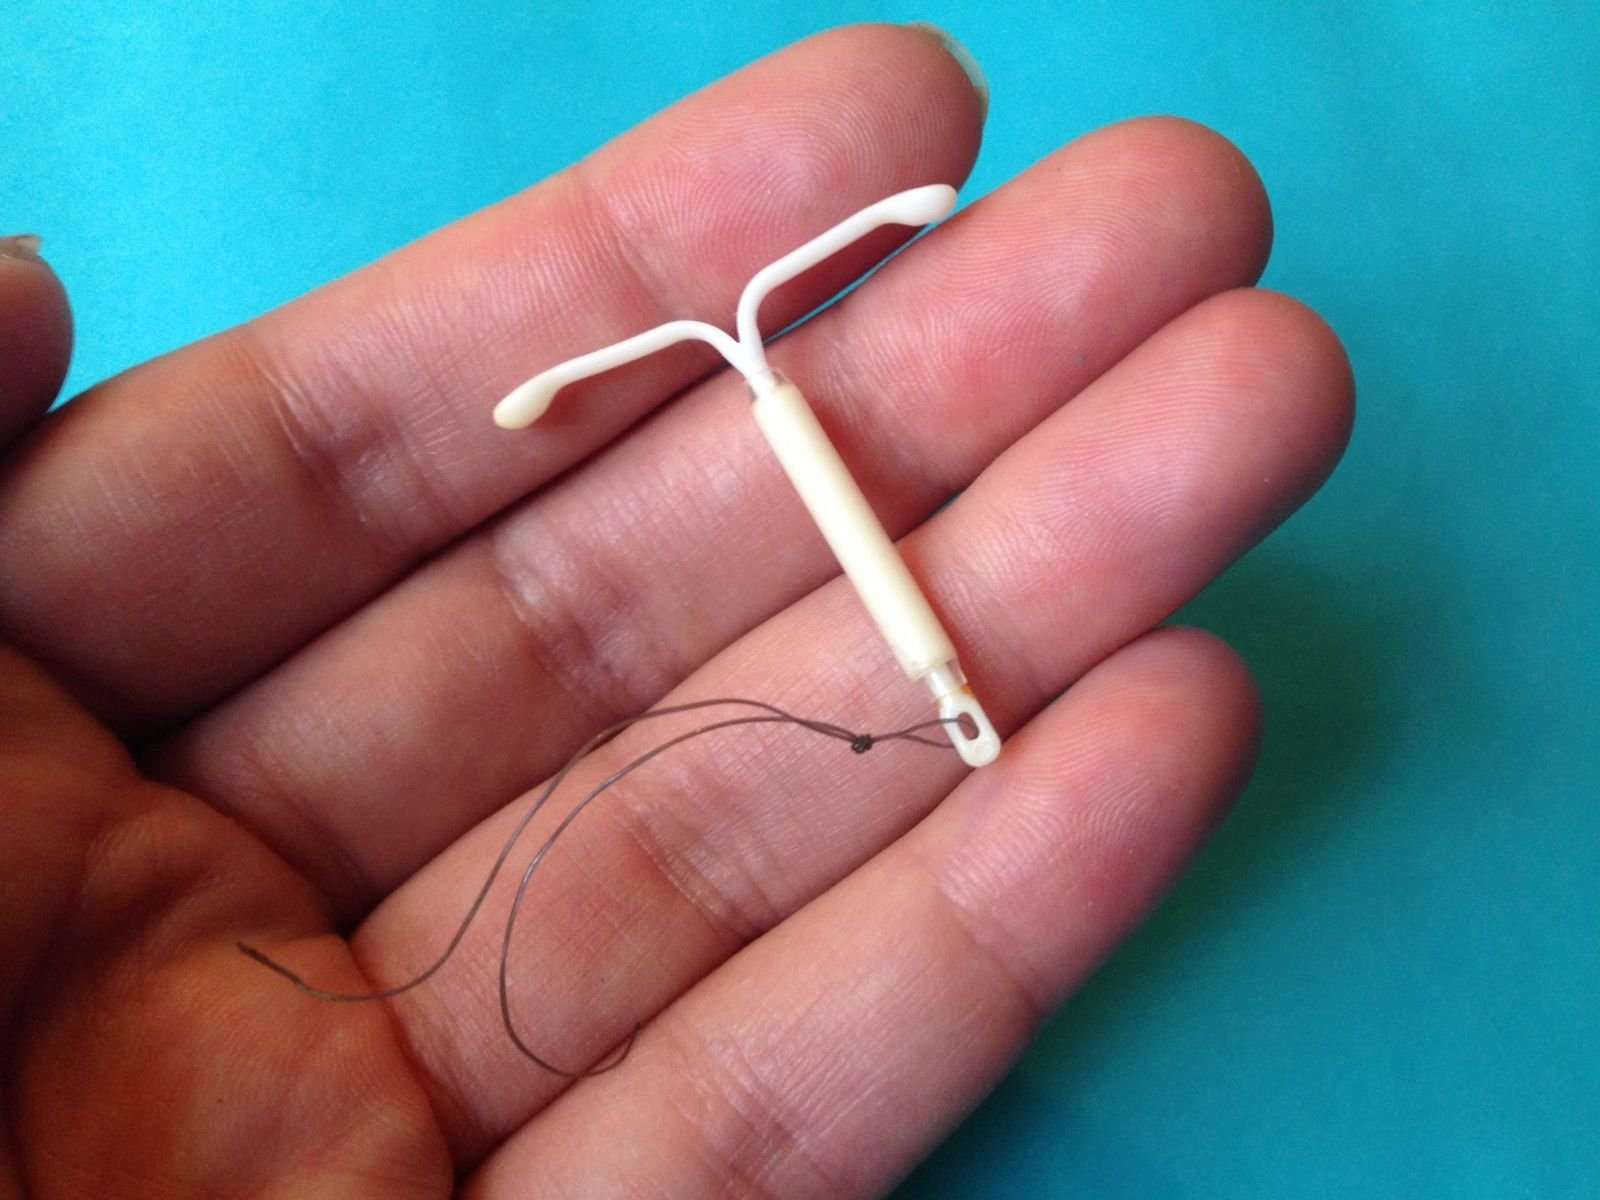 image for Colorado's investment in IUDs and other fire-and-forget birthcontrol produced a "miracle"